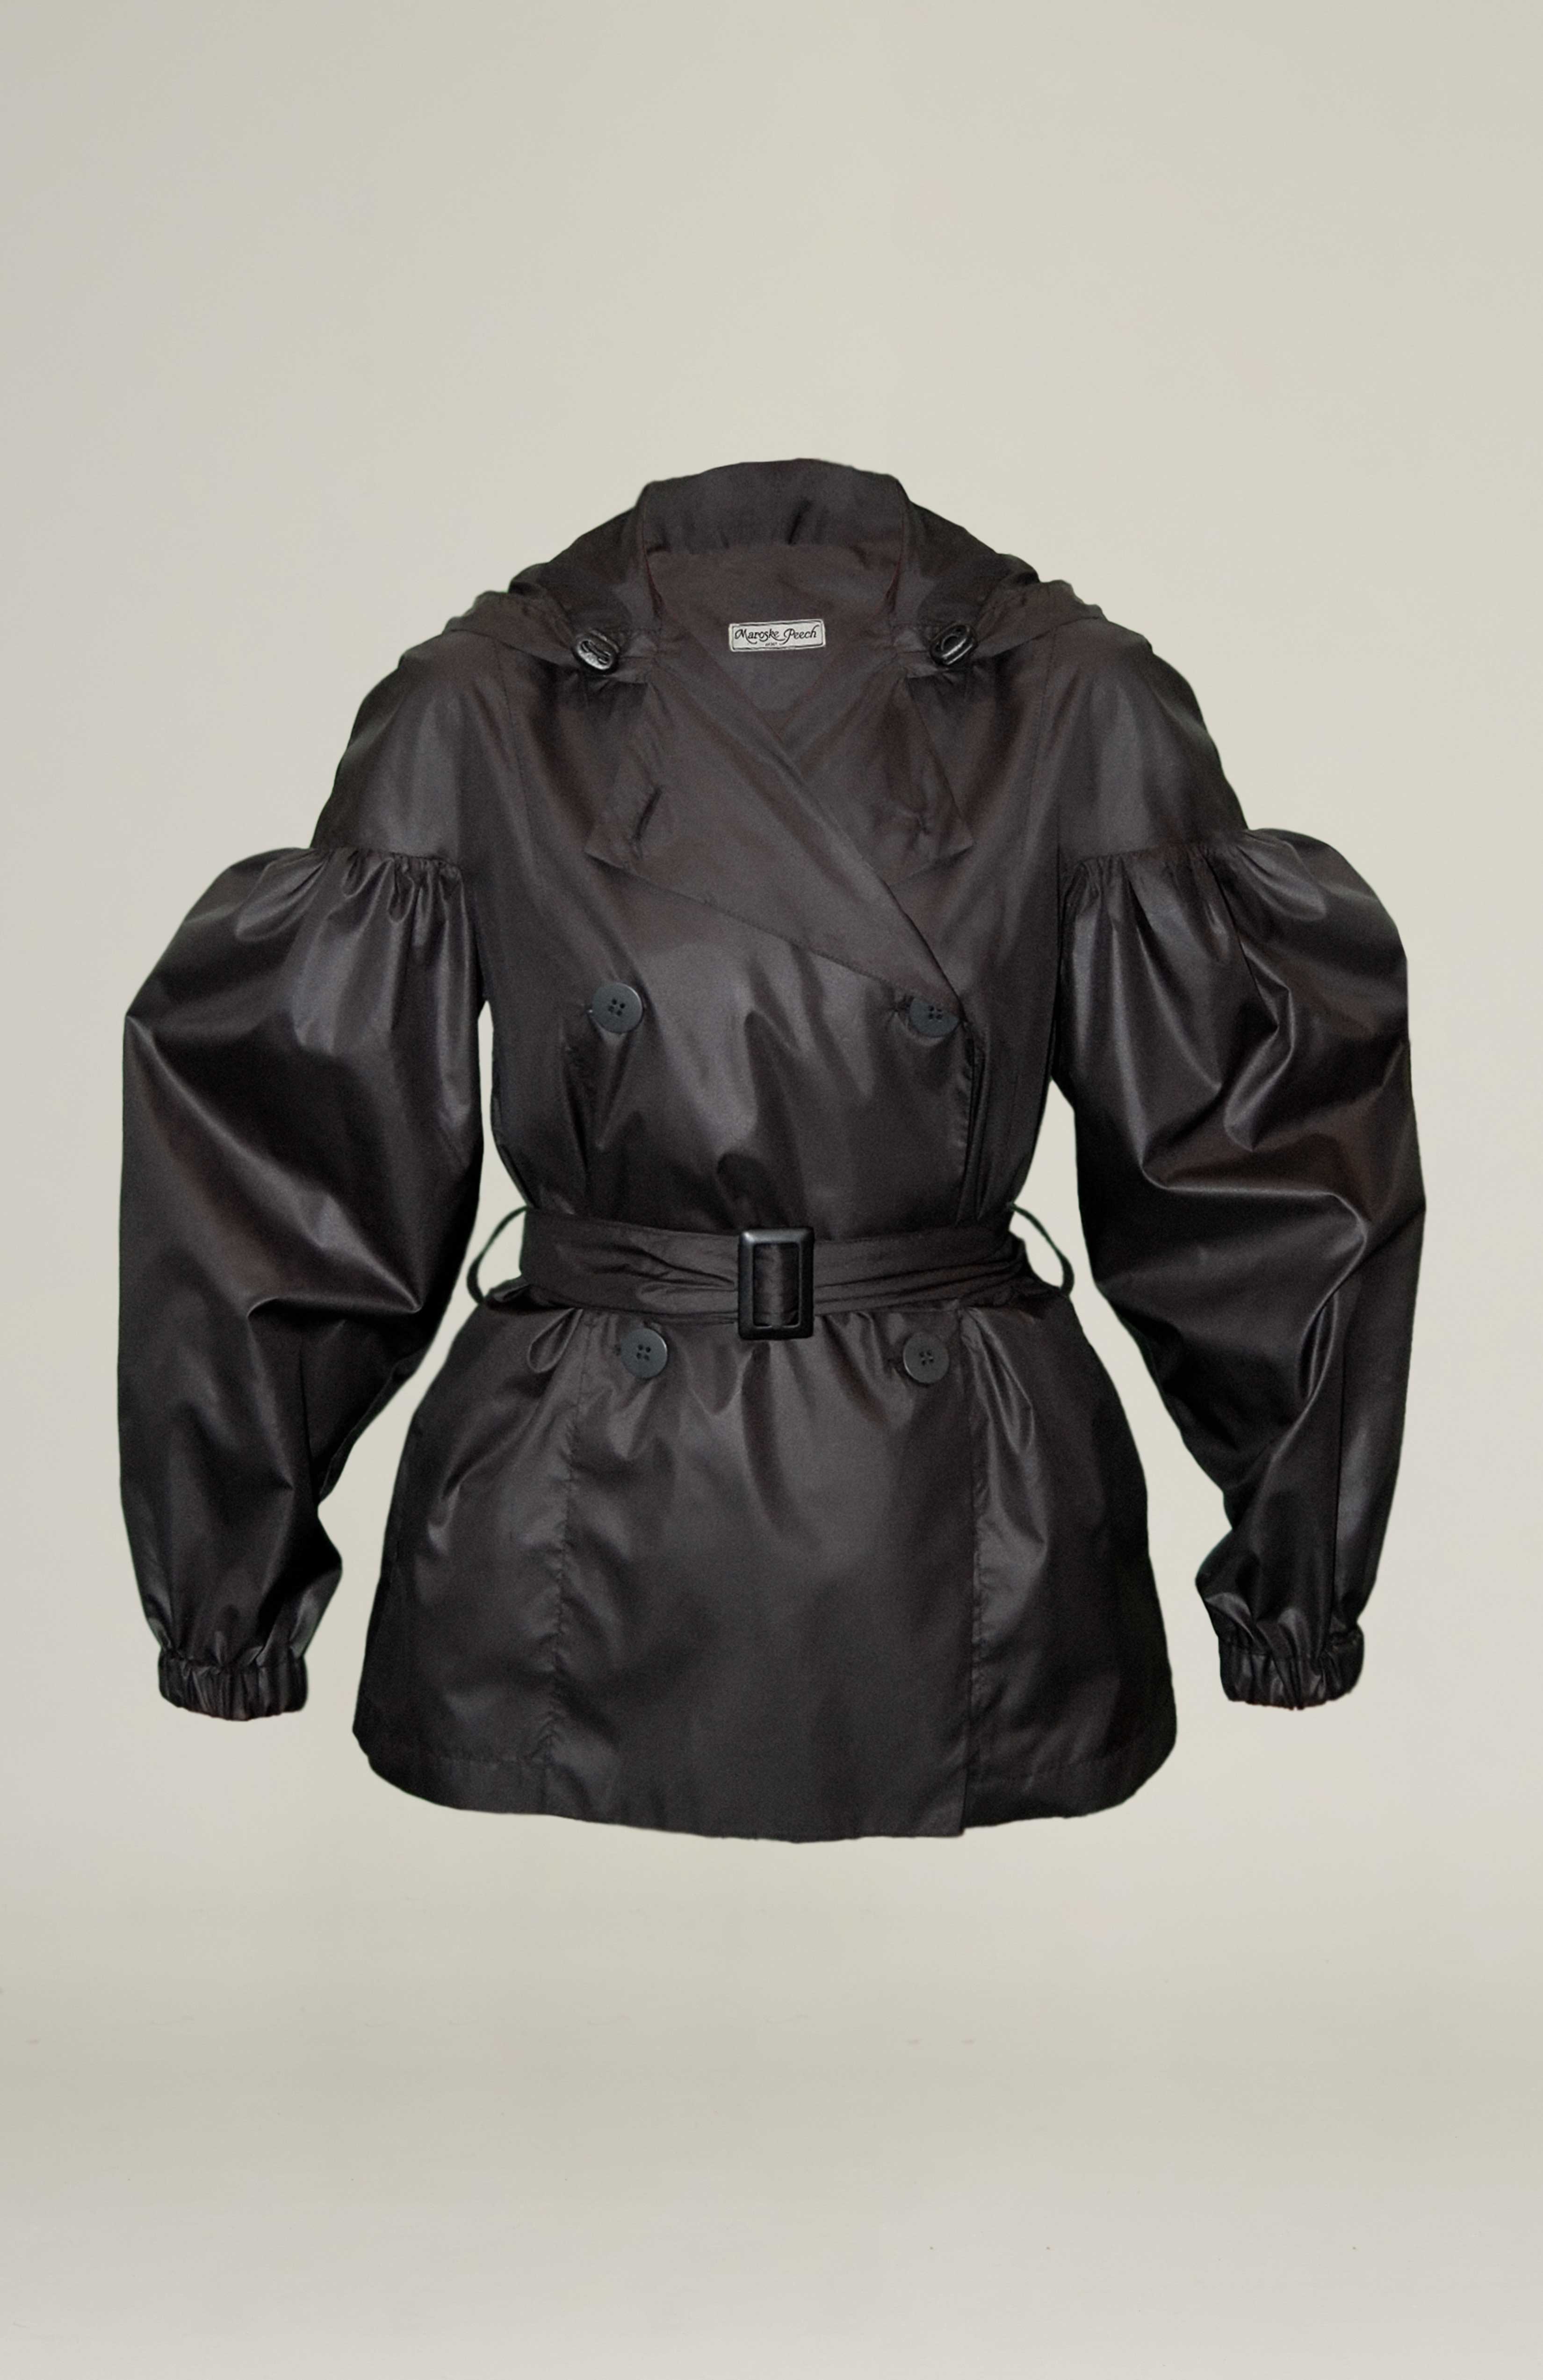 Light weight double breasted trench jacket with dramatic gathered sleeves. Adjustable pull string hood and elasticated cuffs. Side seam pockets and belt loops. Comes with waist belt fasten